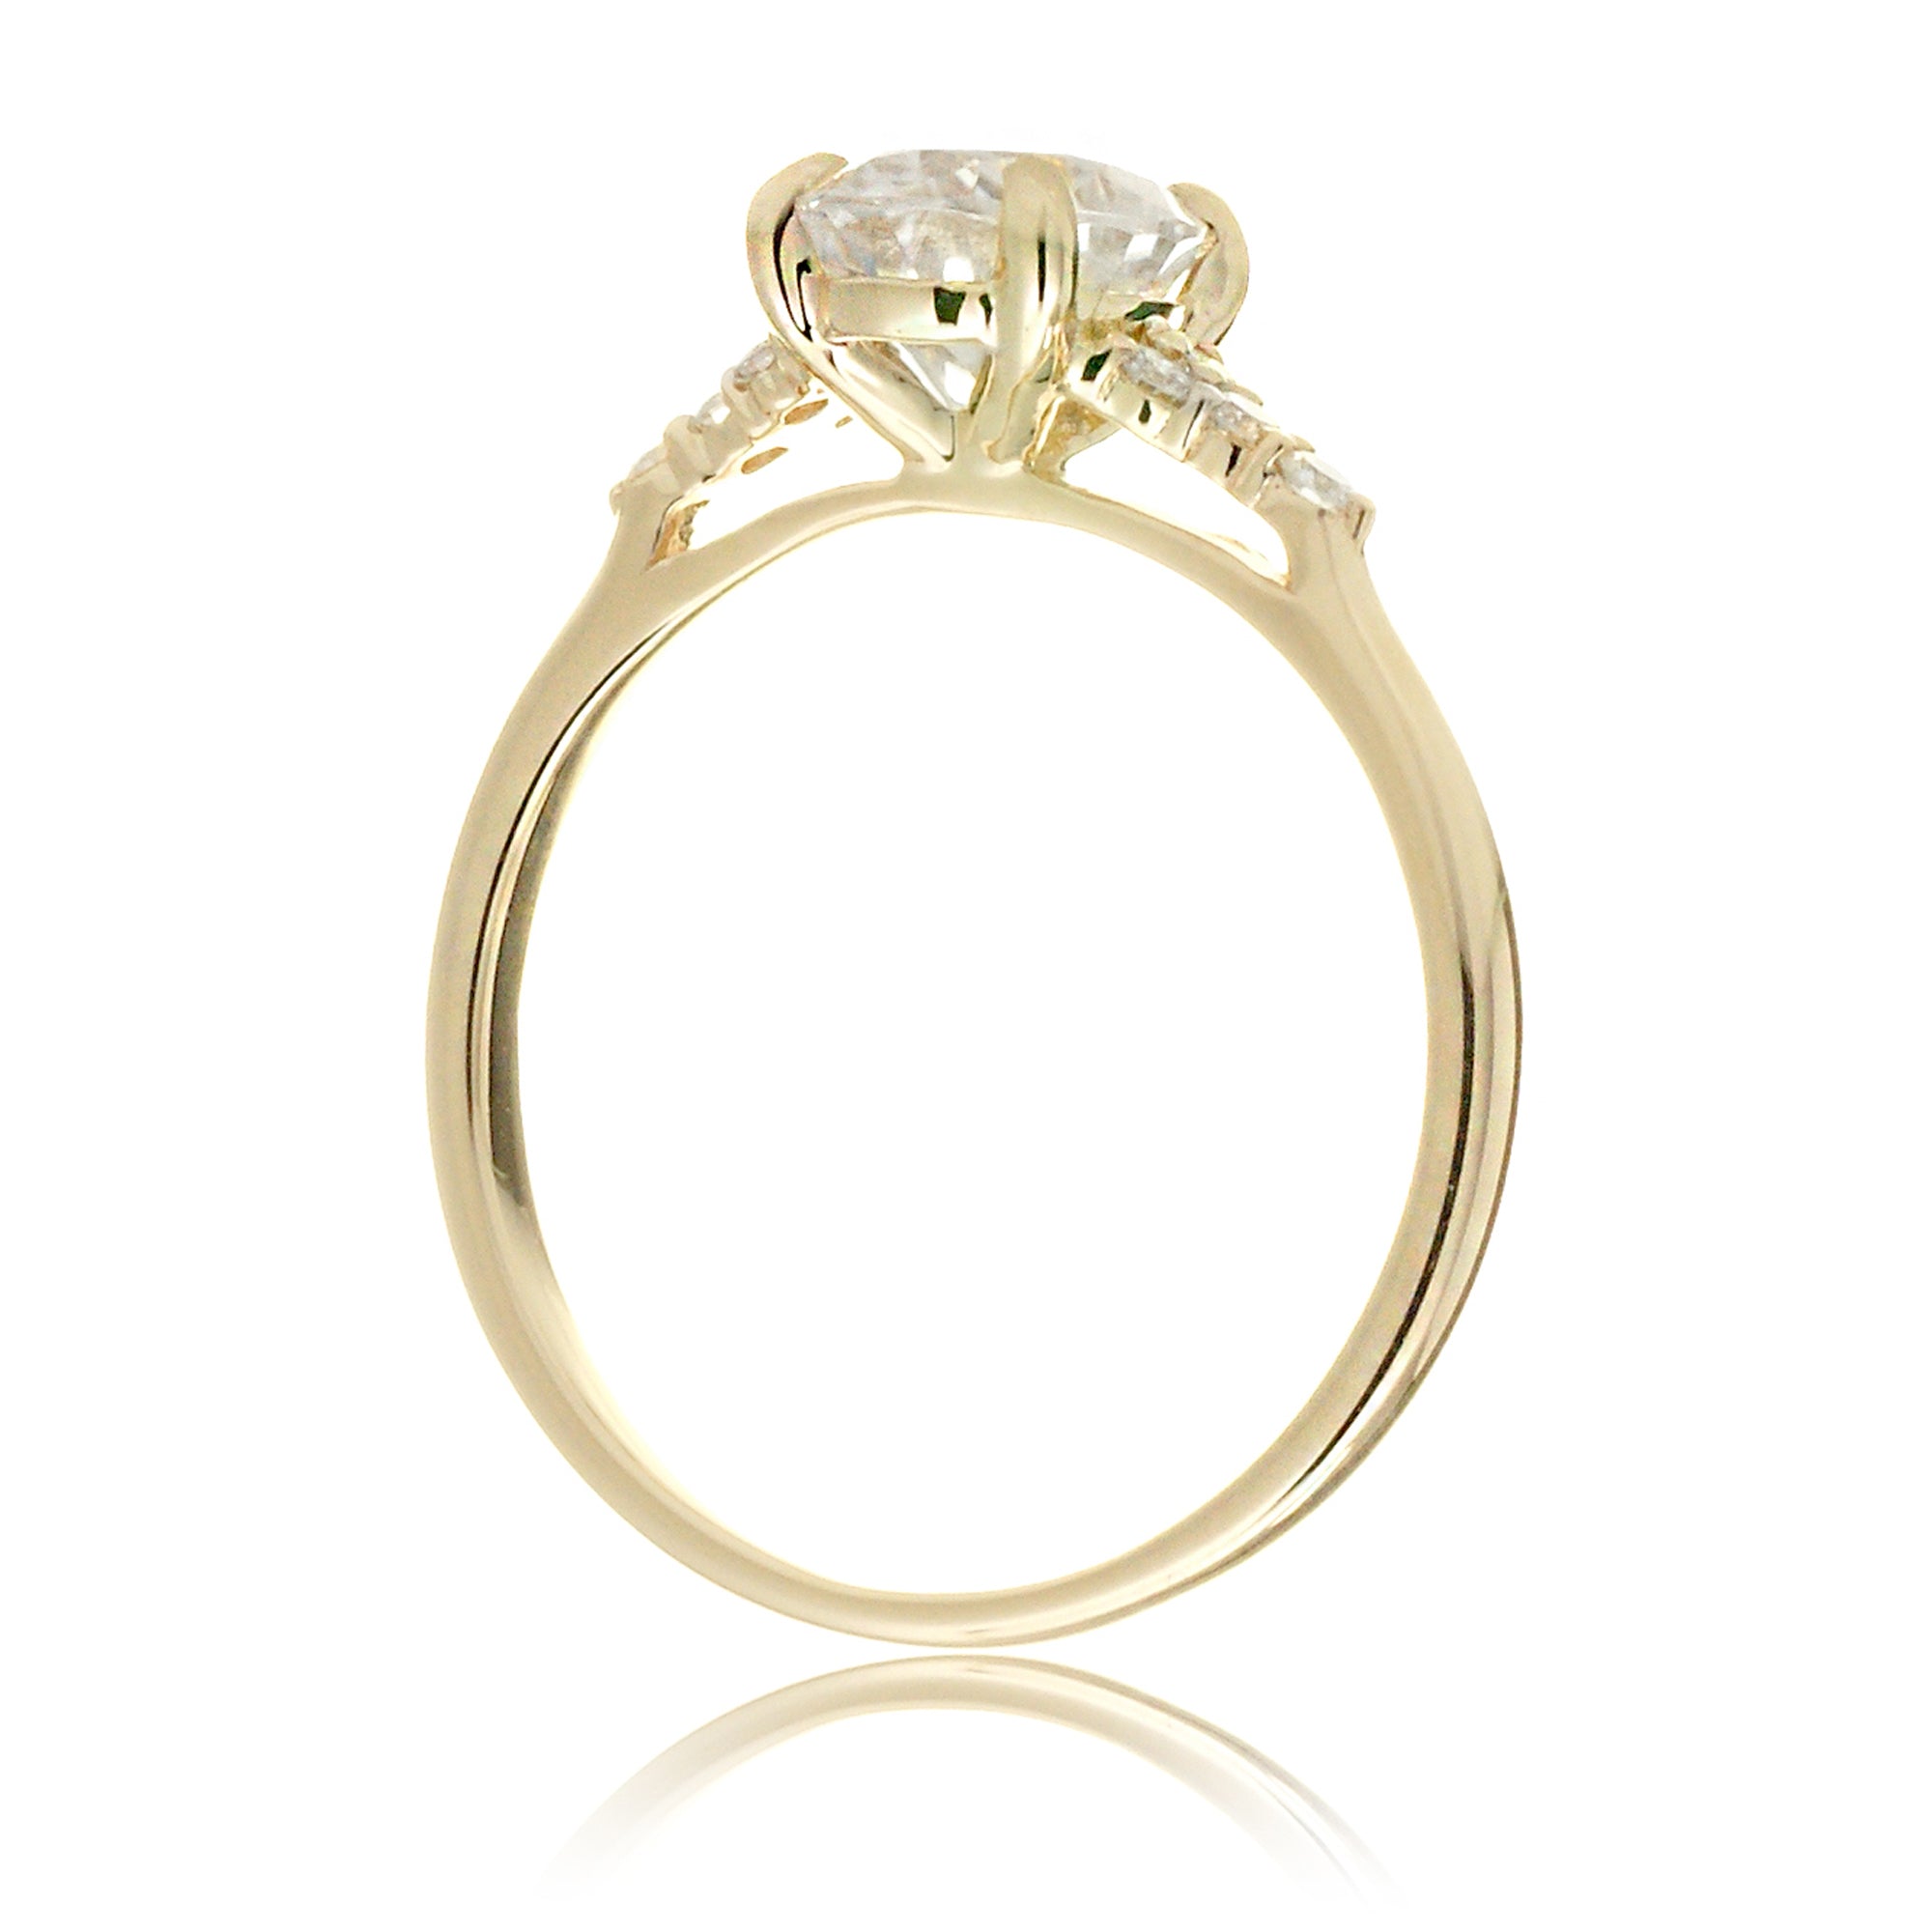 Pear shape diamond engagement ring in yellow gold - the Chloe